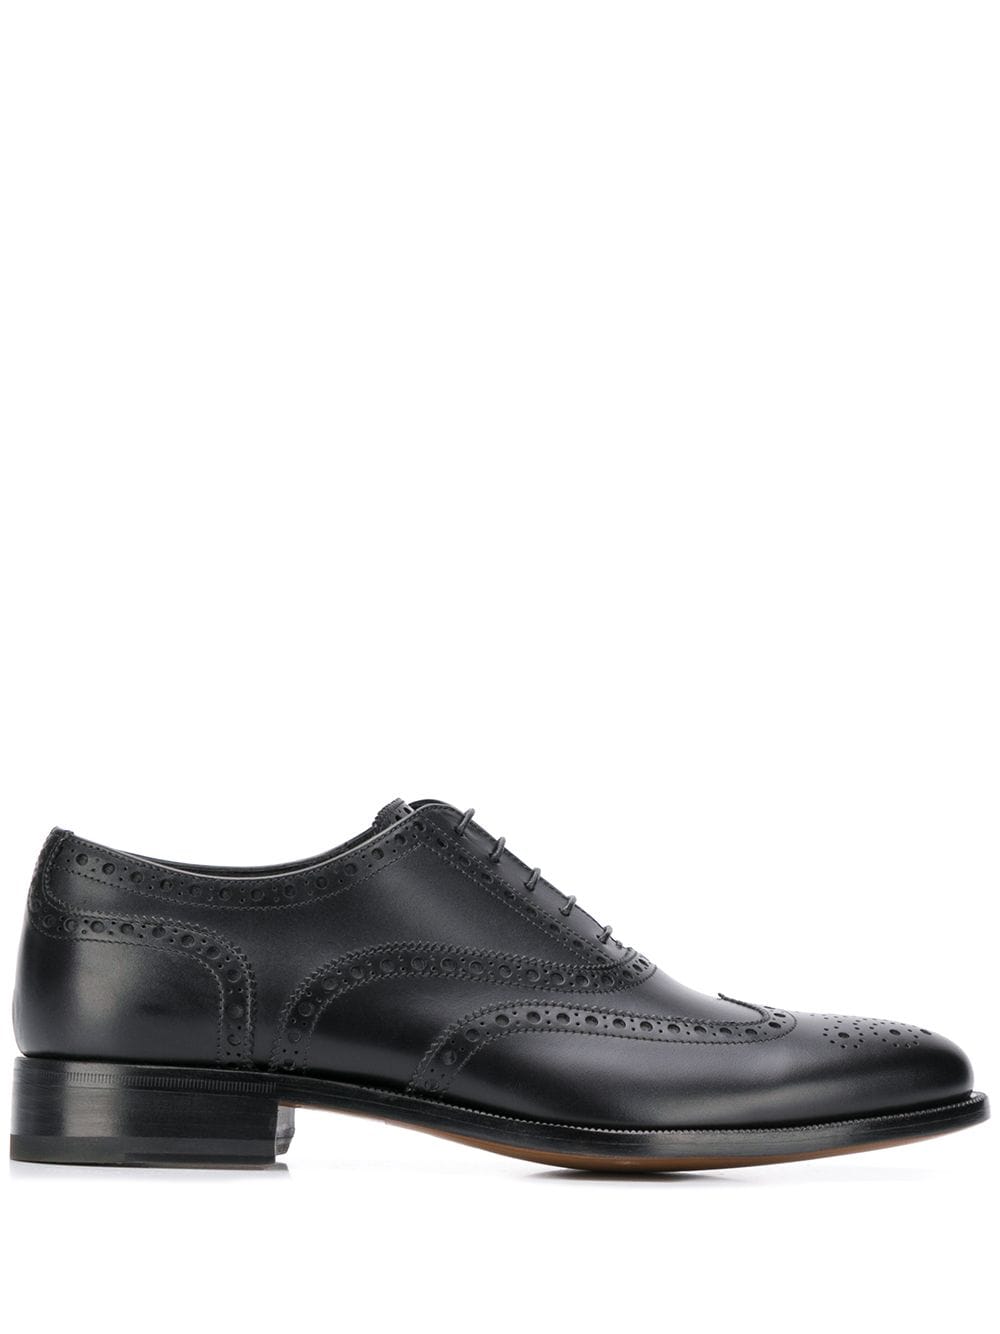 Image 1 of Scarosso Philip Oxford-style brogues